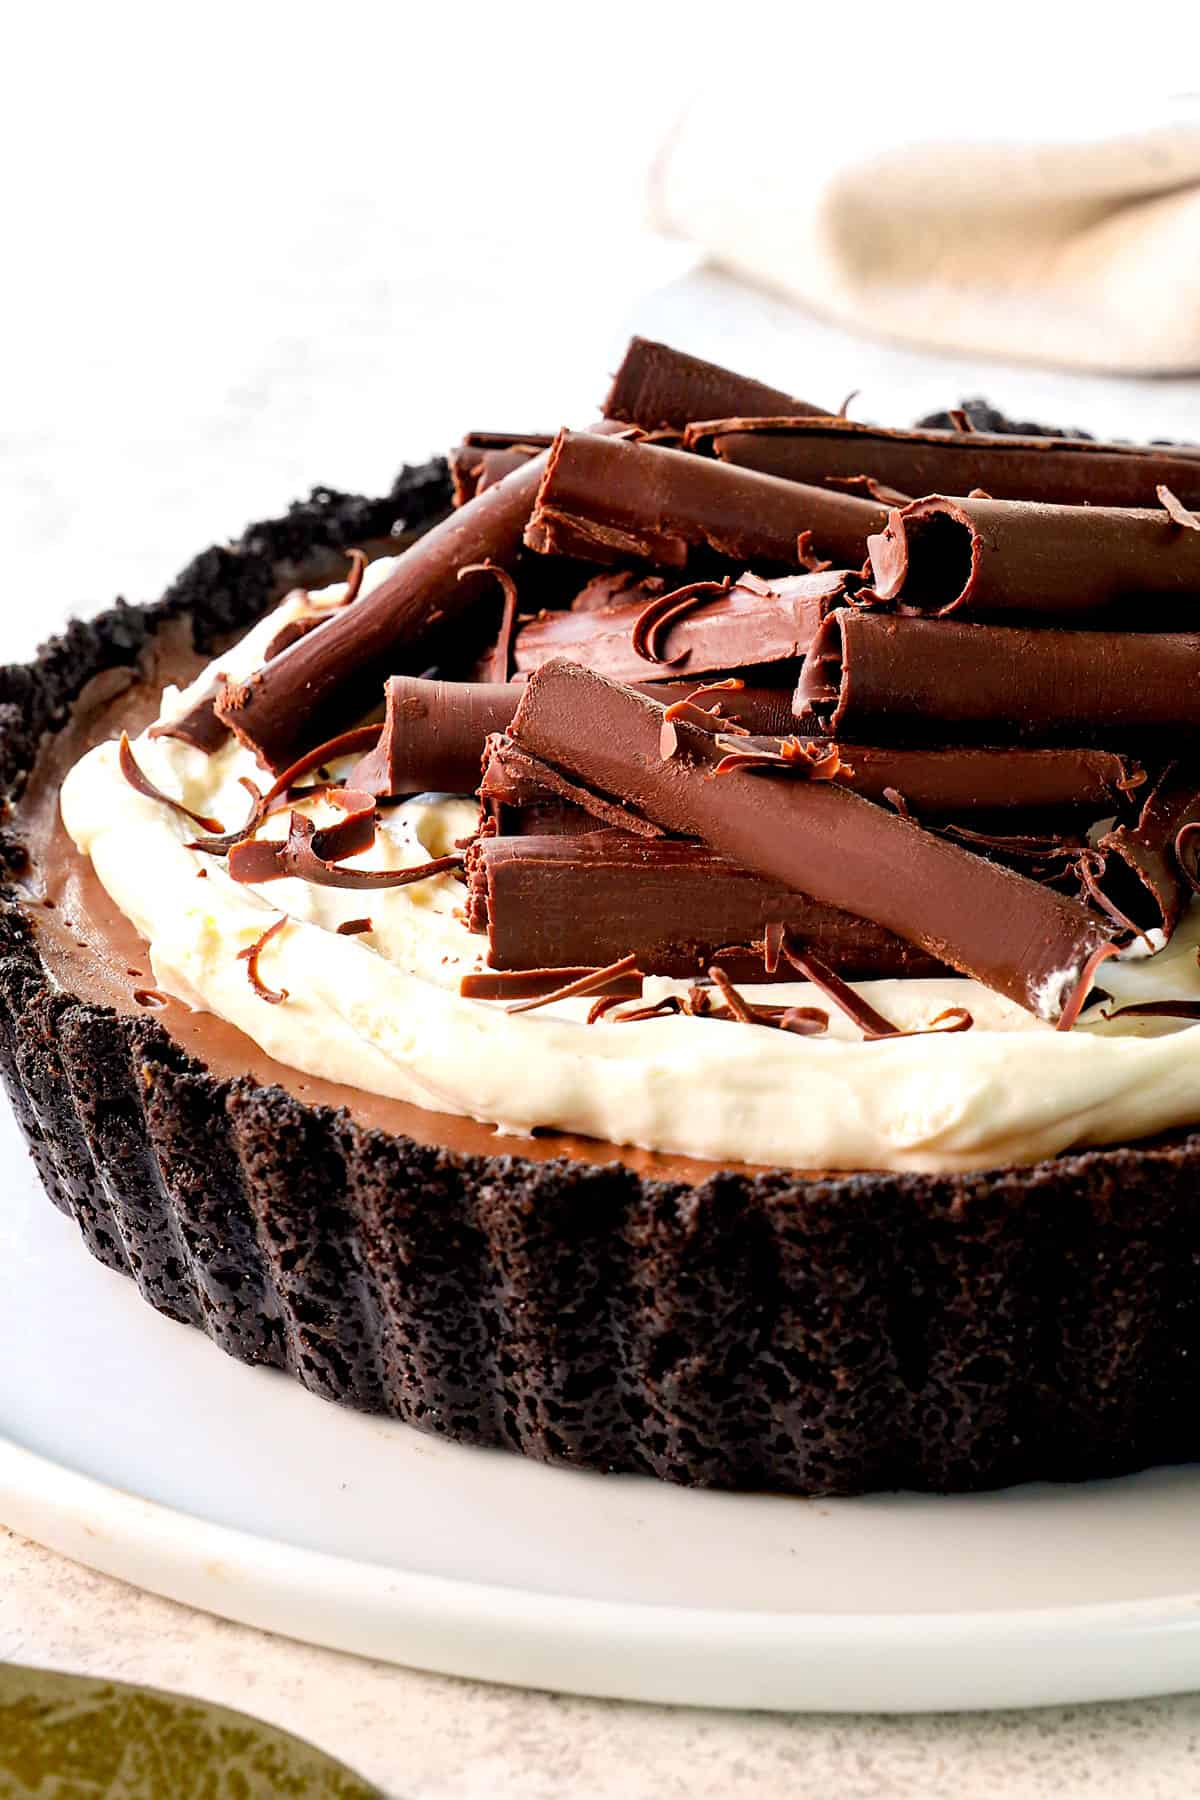 up close side view of classic chocolate cream pie recipe with an Oreo crust